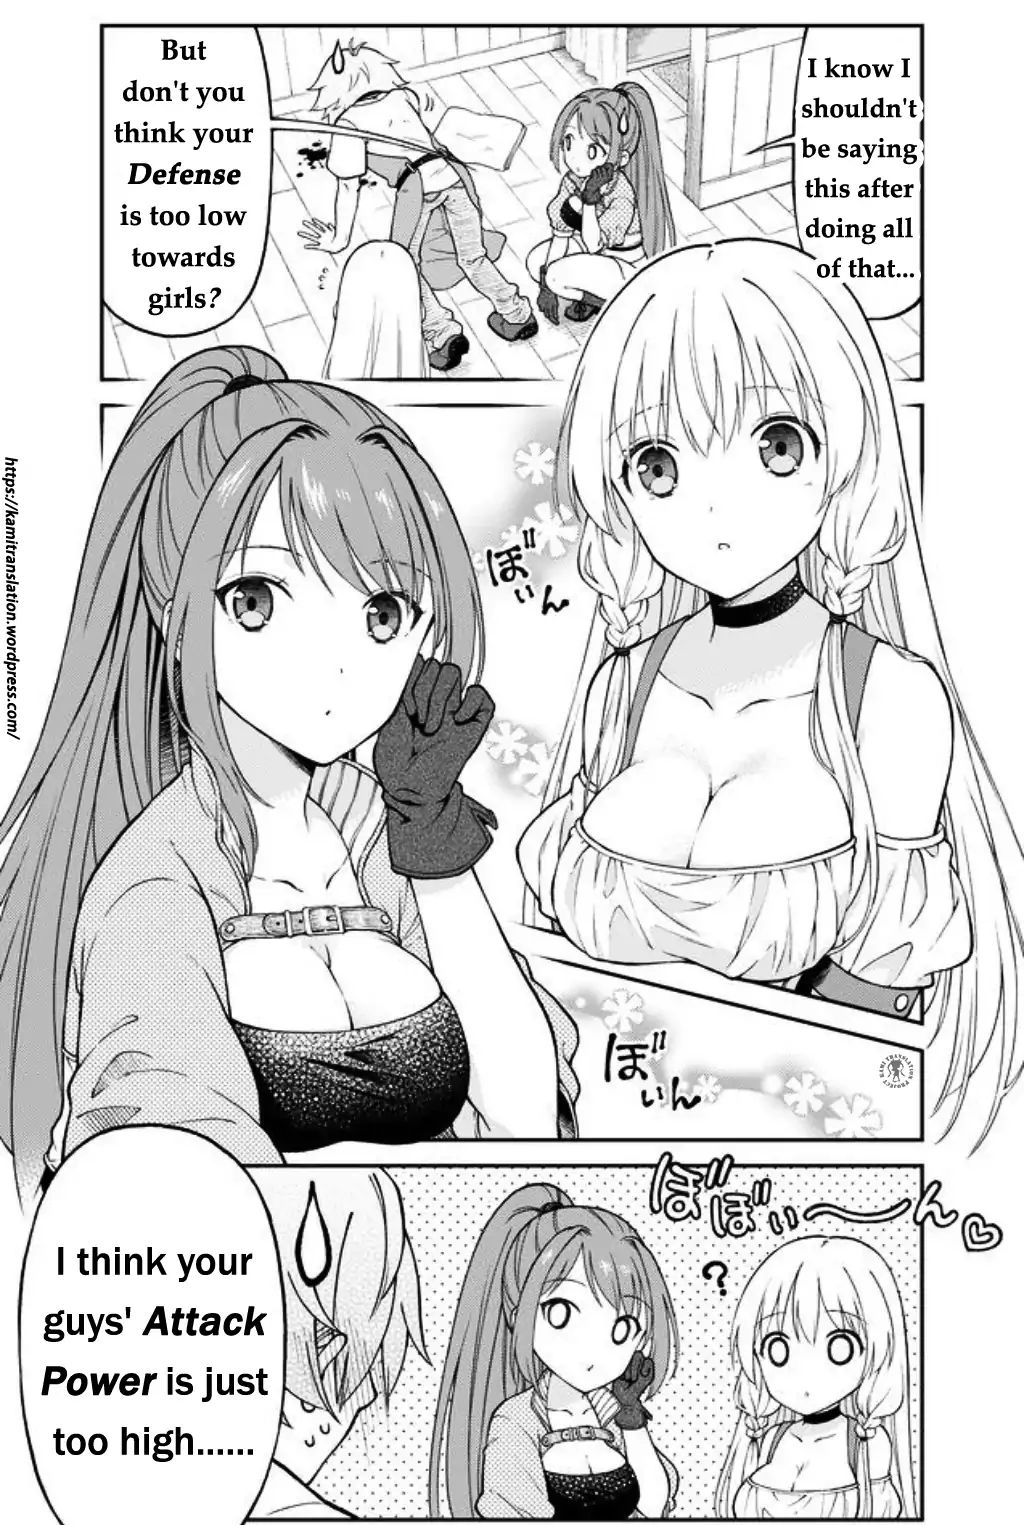 Armor Shop For Ladies & Gentlemen Vol.1 Chapter 7: A Ponytail Approaches 2 - Picture 3